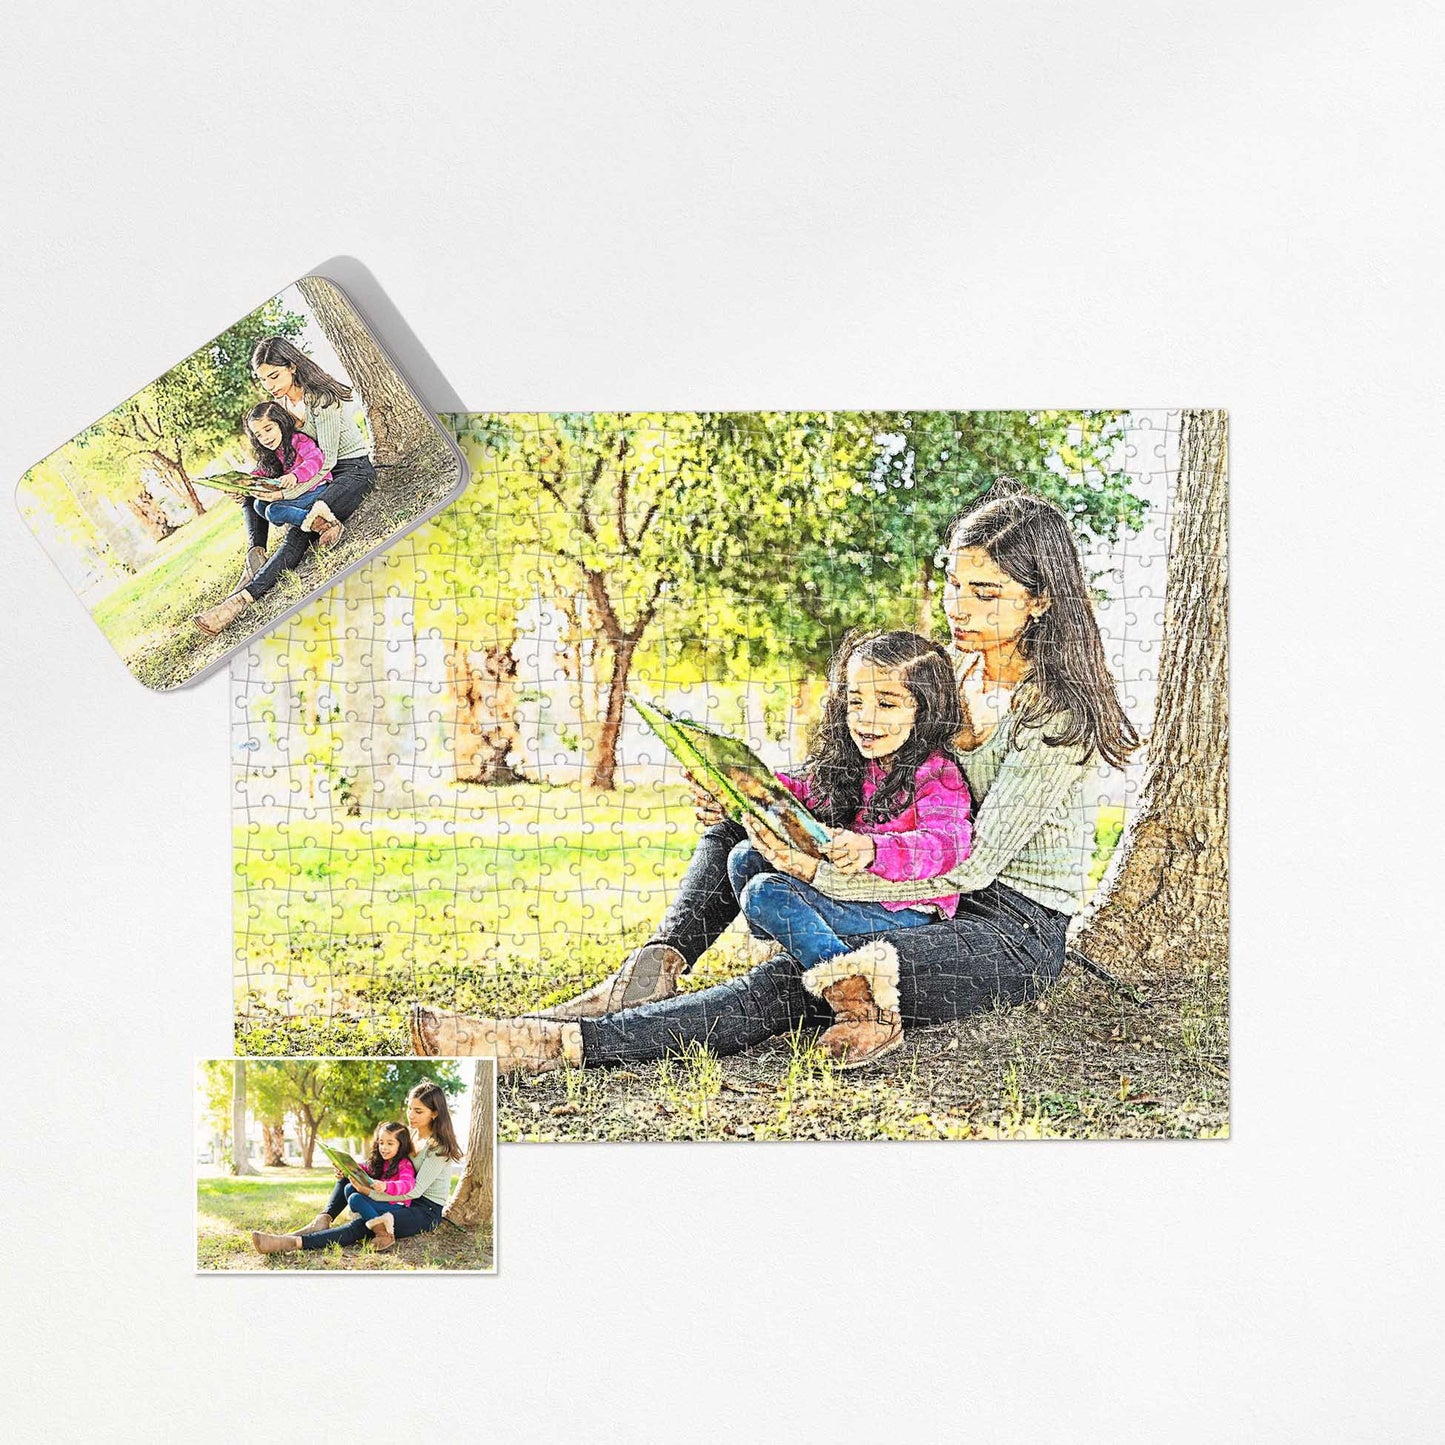 Experience joy through a Personalised Watercolor Jigsaw Puzzle painting. Its watercolour effect creates vibrant, vivid colours on a handmade wooden or cardboard puzzle. This dye sublimation print holds the promise of fun, happiness